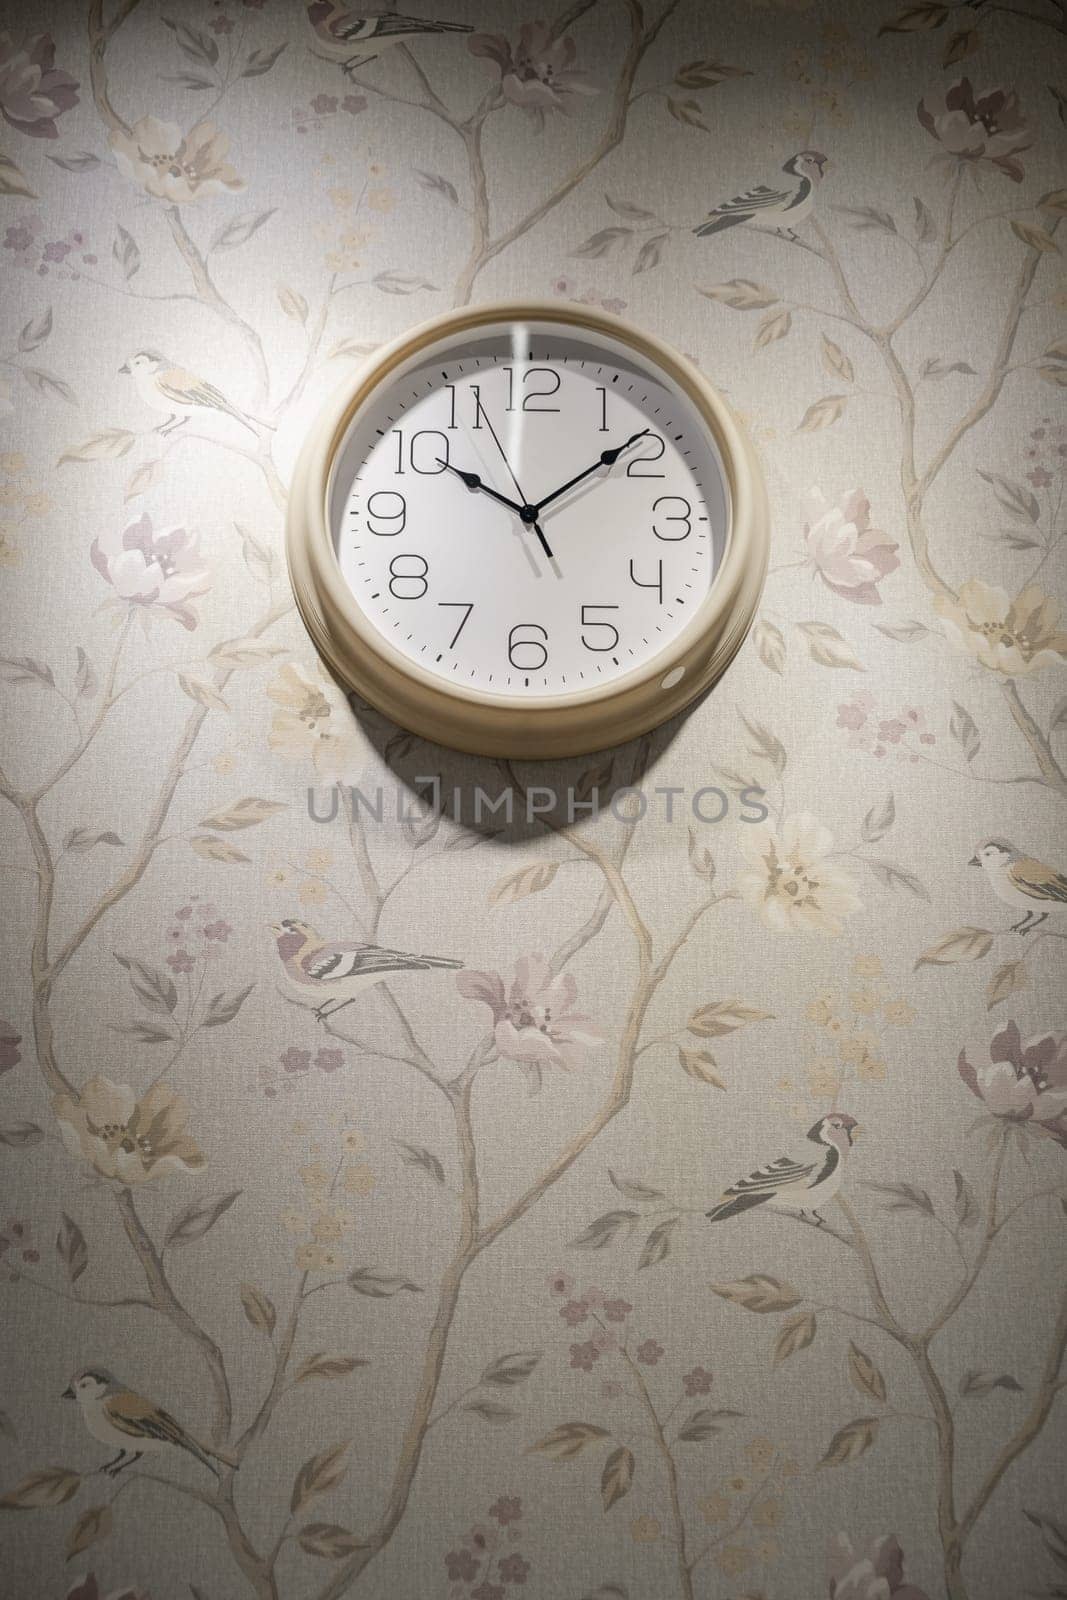 A round clock on the wall indicates the exact time. decor in the room by AnatoliiFoto